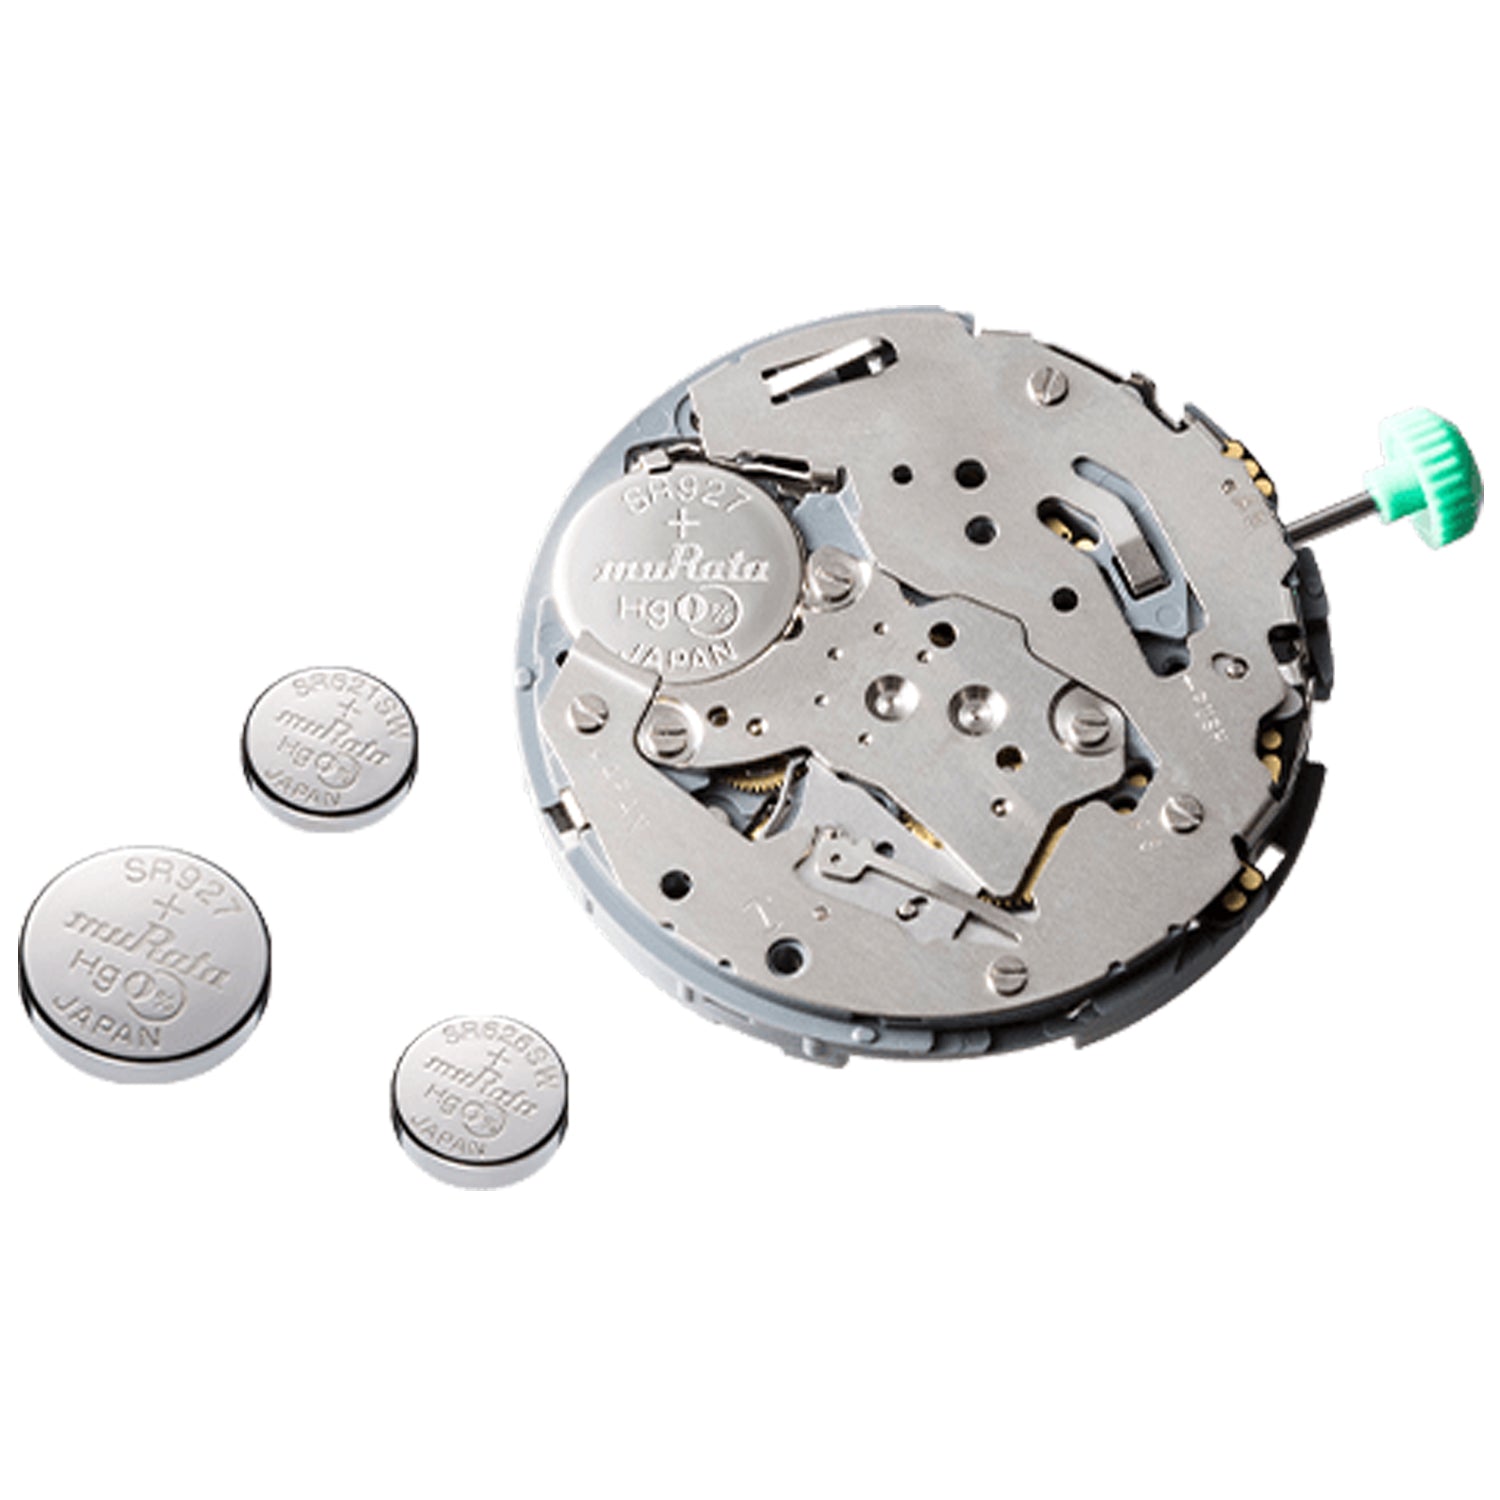 LR1120 Watch Battery Replacement, Cross Reference and Equivalent to 191